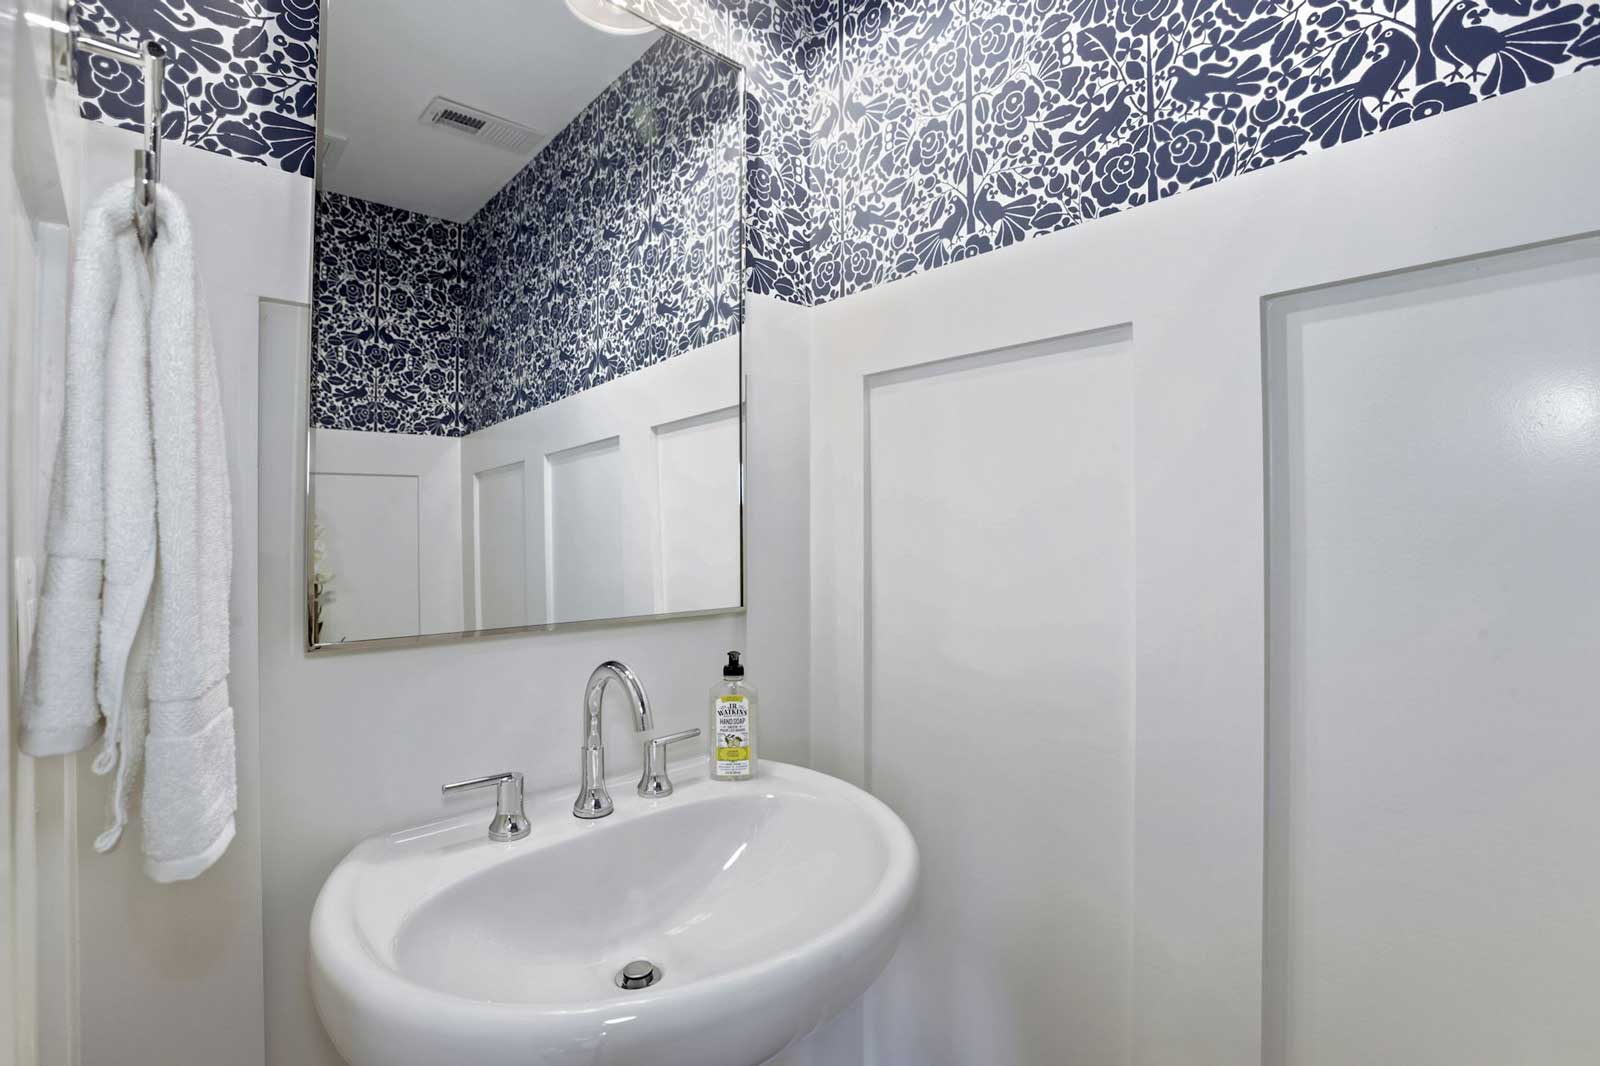 Powder Room Features, Townhomes, Clarksburg MD